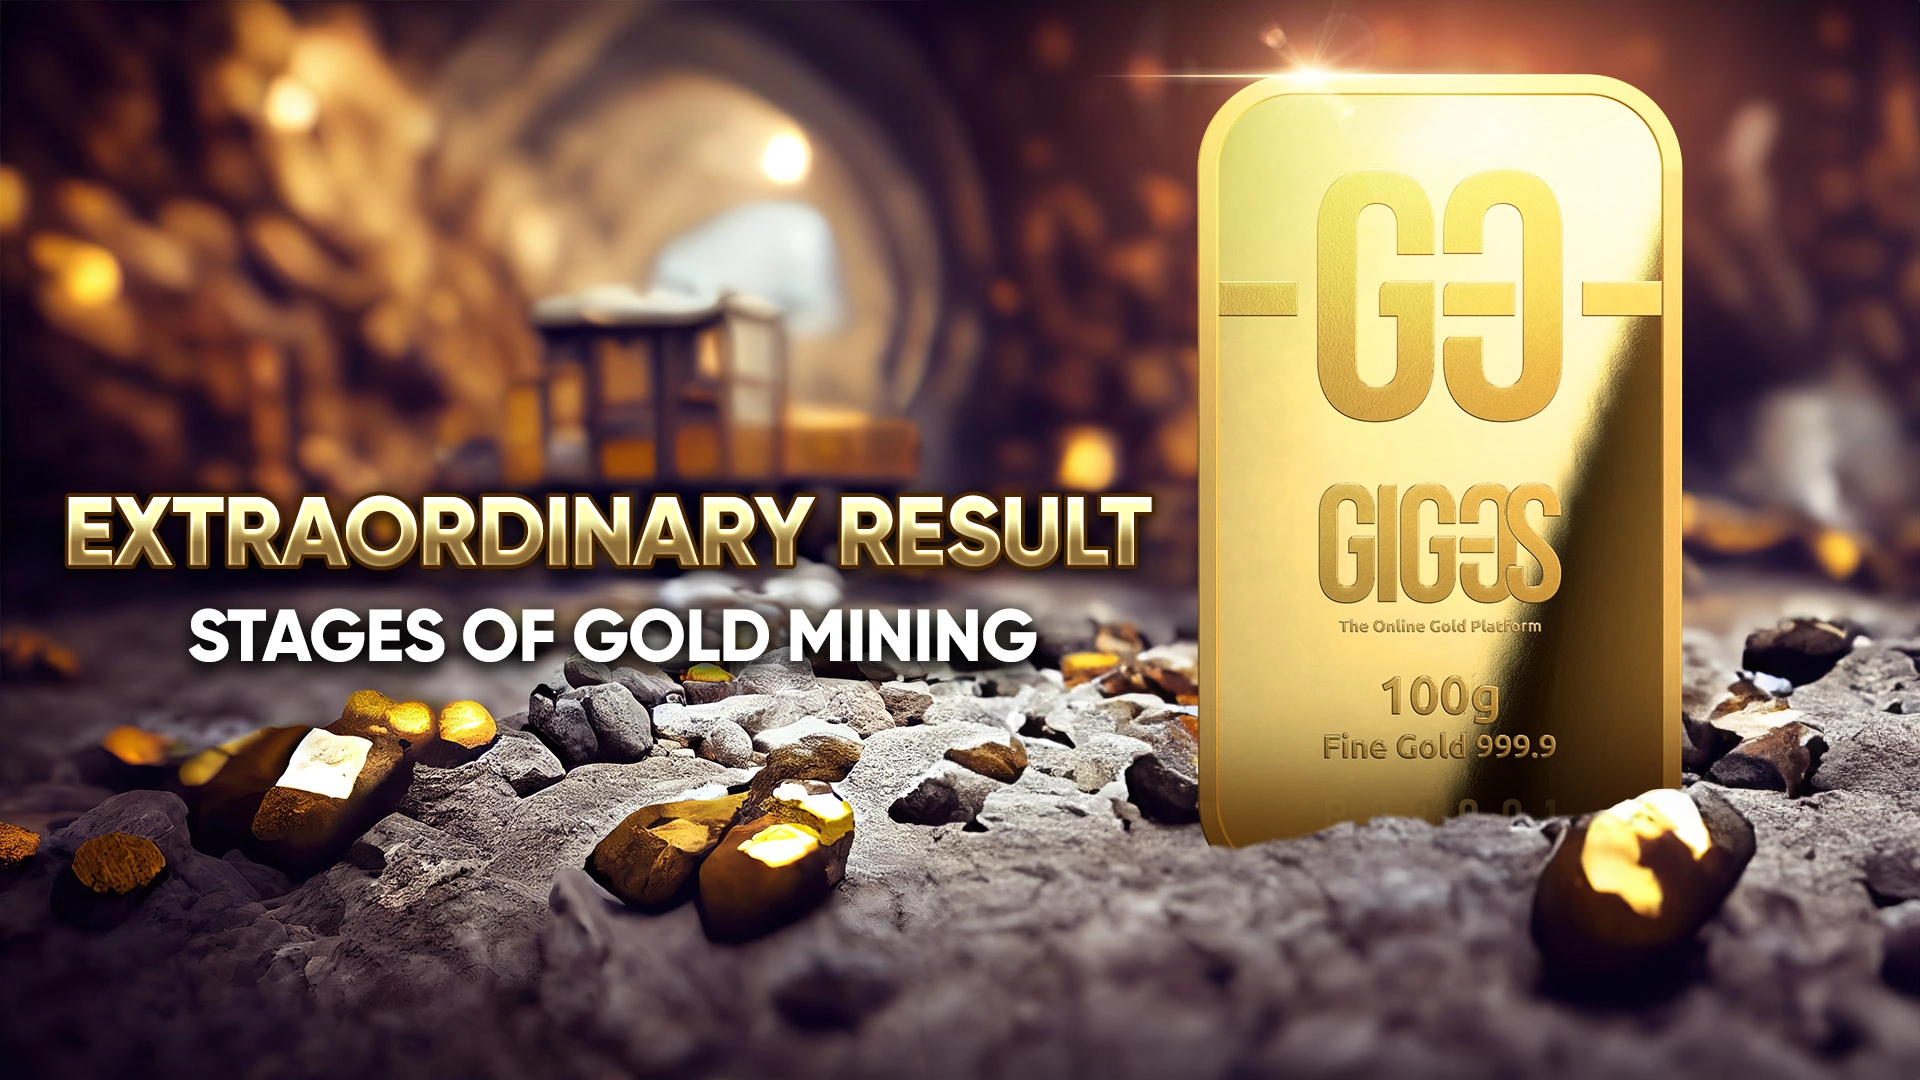 [VIDEO] “The path of gold”: from ore to gold bars